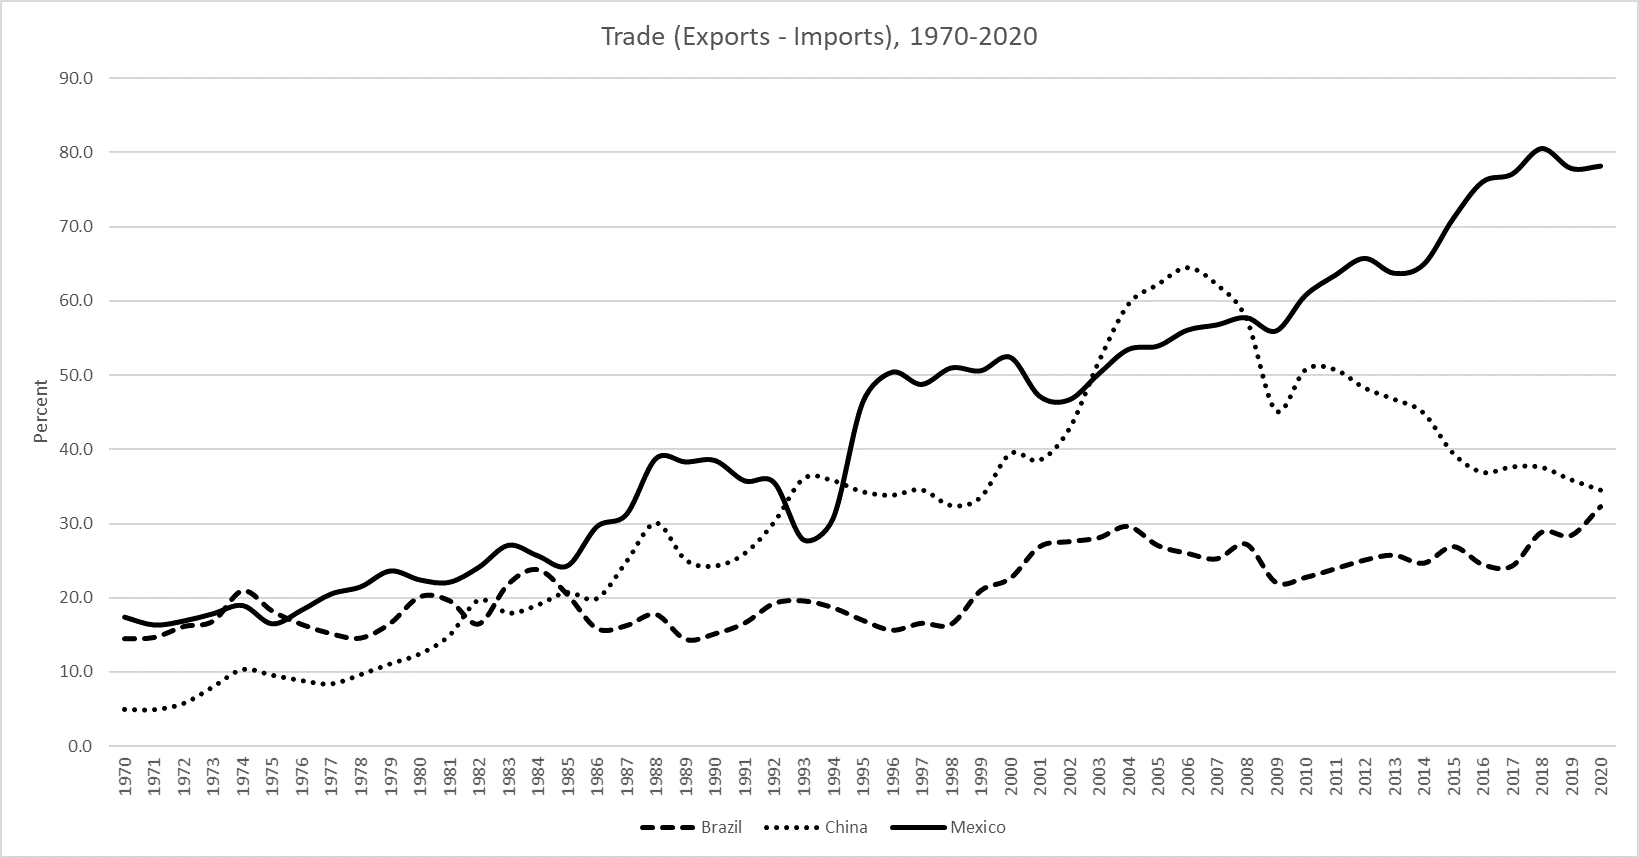 Net exports as a percentage of GDP for Brazil, China, and Mexico, 1970-2020. Net exports for these countries have generally risen, although China's next exports have been declining since the mid-2000s.